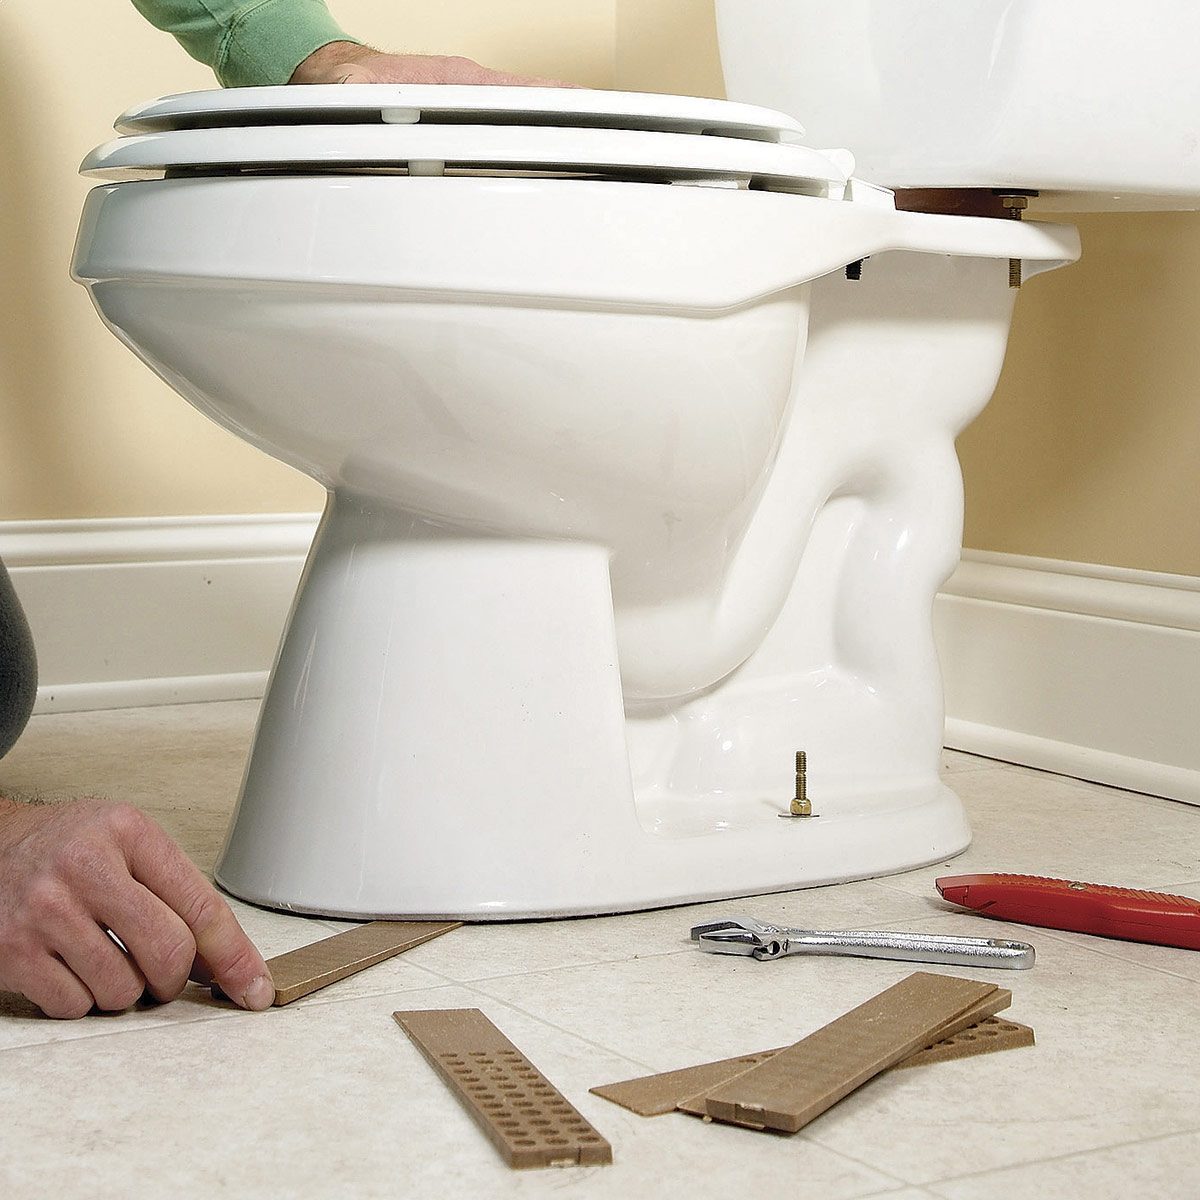 14 Toilet Problems You Should Never Ignore